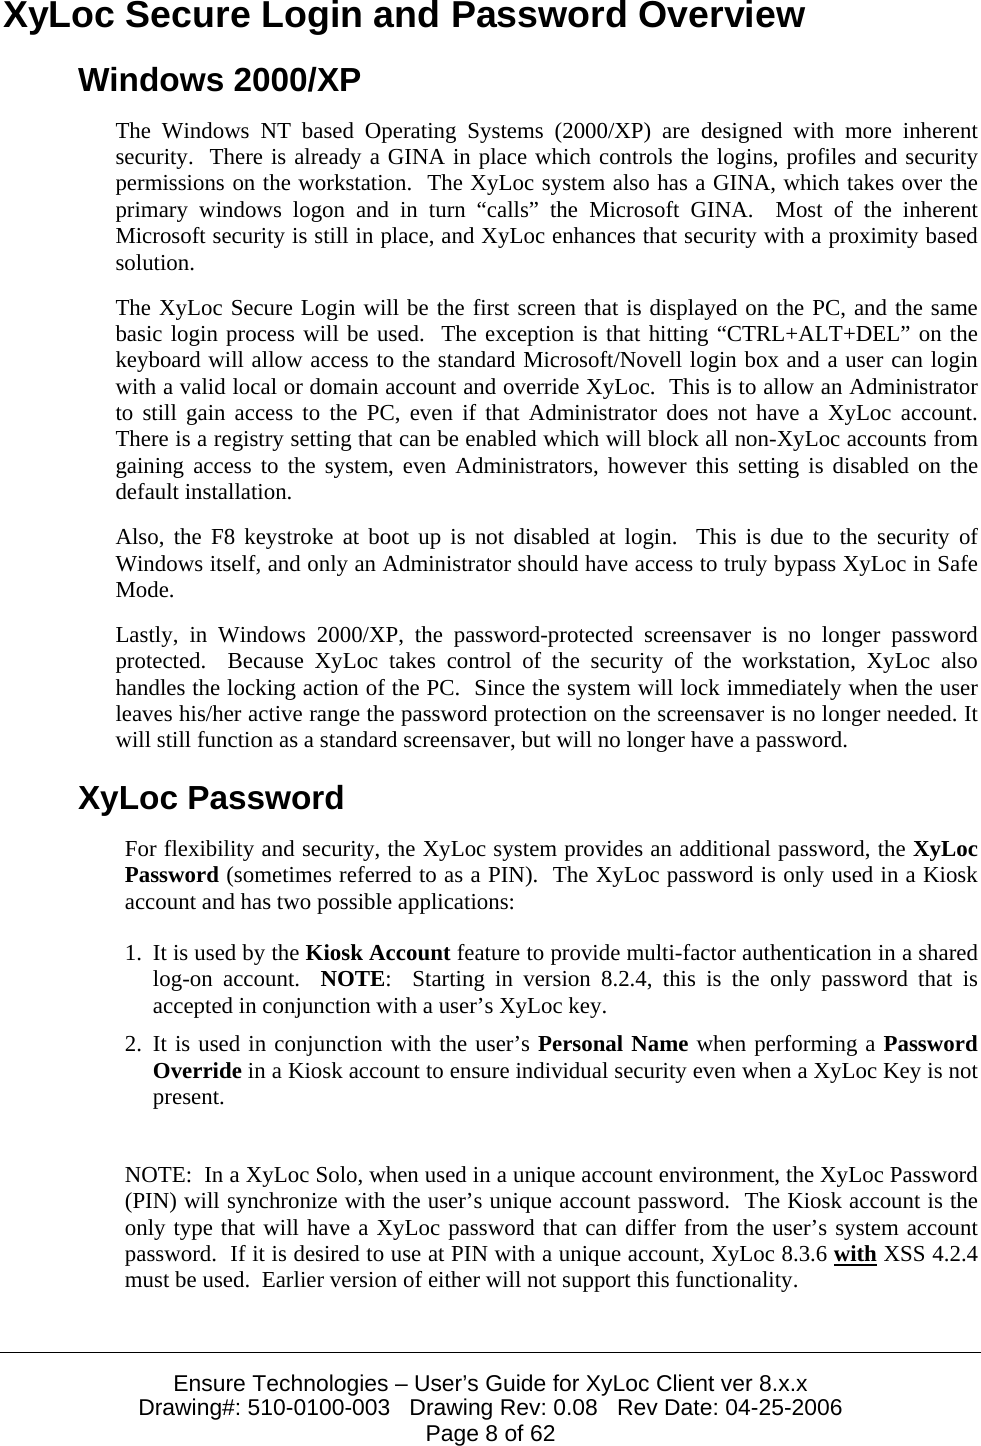  Ensure Technologies – User’s Guide for XyLoc Client ver 8.x.x Drawing#: 510-0100-003   Drawing Rev: 0.08   Rev Date: 04-25-2006 Page 8 of 62 XyLoc Secure Login and Password Overview Windows 2000/XP The Windows NT based Operating Systems (2000/XP) are designed with more inherent security.  There is already a GINA in place which controls the logins, profiles and security permissions on the workstation.  The XyLoc system also has a GINA, which takes over the primary windows logon and in turn “calls” the Microsoft GINA.  Most of the inherent Microsoft security is still in place, and XyLoc enhances that security with a proximity based solution. The XyLoc Secure Login will be the first screen that is displayed on the PC, and the same basic login process will be used.  The exception is that hitting “CTRL+ALT+DEL” on the keyboard will allow access to the standard Microsoft/Novell login box and a user can login with a valid local or domain account and override XyLoc.  This is to allow an Administrator to still gain access to the PC, even if that Administrator does not have a XyLoc account.  There is a registry setting that can be enabled which will block all non-XyLoc accounts from gaining access to the system, even Administrators, however this setting is disabled on the default installation. Also, the F8 keystroke at boot up is not disabled at login.  This is due to the security of Windows itself, and only an Administrator should have access to truly bypass XyLoc in Safe Mode. Lastly, in Windows 2000/XP, the password-protected screensaver is no longer password protected.  Because XyLoc takes control of the security of the workstation, XyLoc also handles the locking action of the PC.  Since the system will lock immediately when the user leaves his/her active range the password protection on the screensaver is no longer needed. It will still function as a standard screensaver, but will no longer have a password. XyLoc Password For flexibility and security, the XyLoc system provides an additional password, the XyLoc Password (sometimes referred to as a PIN).  The XyLoc password is only used in a Kiosk account and has two possible applications: 1. It is used by the Kiosk Account feature to provide multi-factor authentication in a shared log-on account.  NOTE:  Starting in version 8.2.4, this is the only password that is accepted in conjunction with a user’s XyLoc key. 2. It is used in conjunction with the user’s Personal Name when performing a Password Override in a Kiosk account to ensure individual security even when a XyLoc Key is not present.  NOTE:  In a XyLoc Solo, when used in a unique account environment, the XyLoc Password (PIN) will synchronize with the user’s unique account password.  The Kiosk account is the only type that will have a XyLoc password that can differ from the user’s system account password.  If it is desired to use at PIN with a unique account, XyLoc 8.3.6 with XSS 4.2.4 must be used.  Earlier version of either will not support this functionality. 